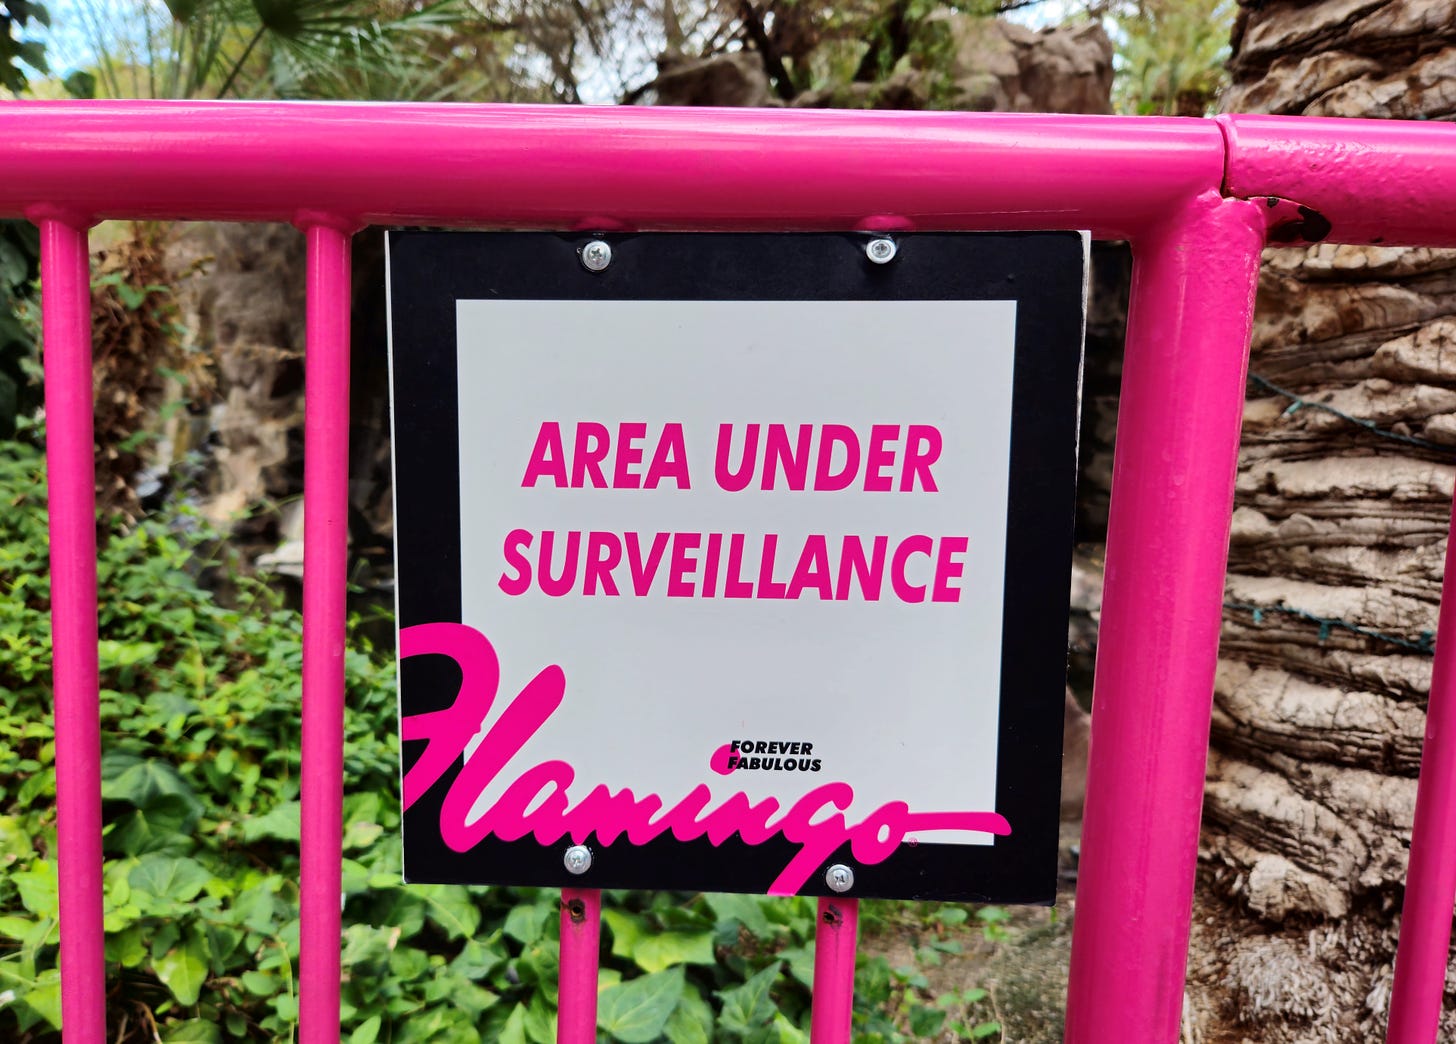 A photo of an Area Under Surveillance sign at the Flamingo Hotel.